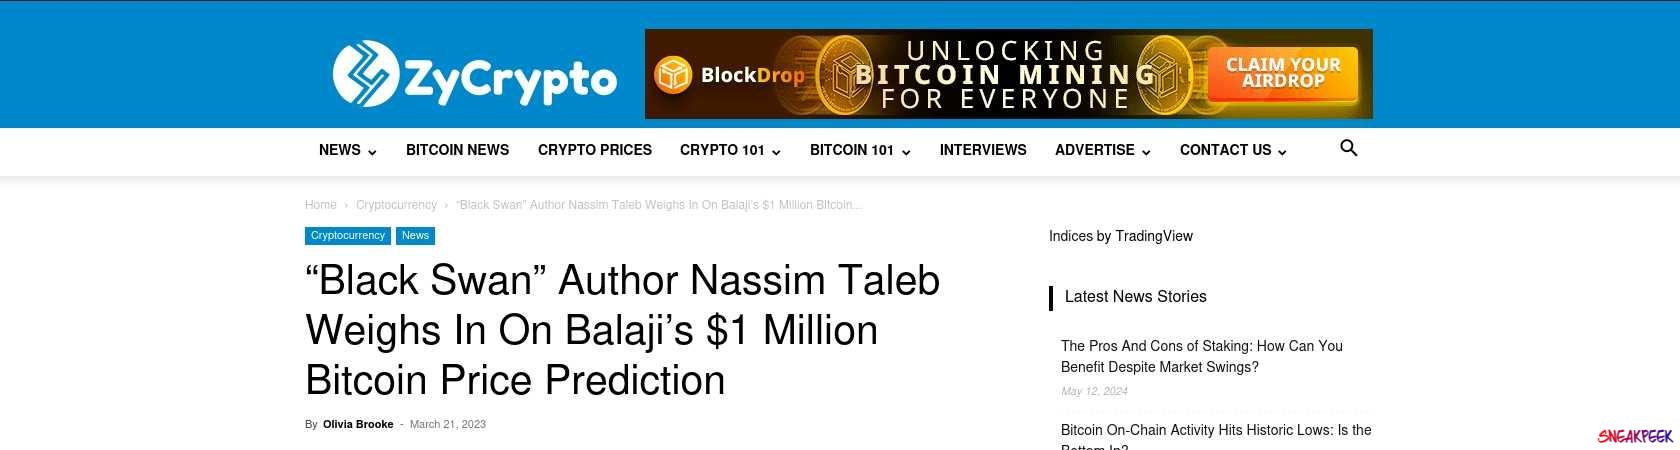 Read the full Article:  ⭲ “Black Swan” Author Nassim Taleb Weighs In On Balaji’s $1 Million Bitcoin Price Prediction